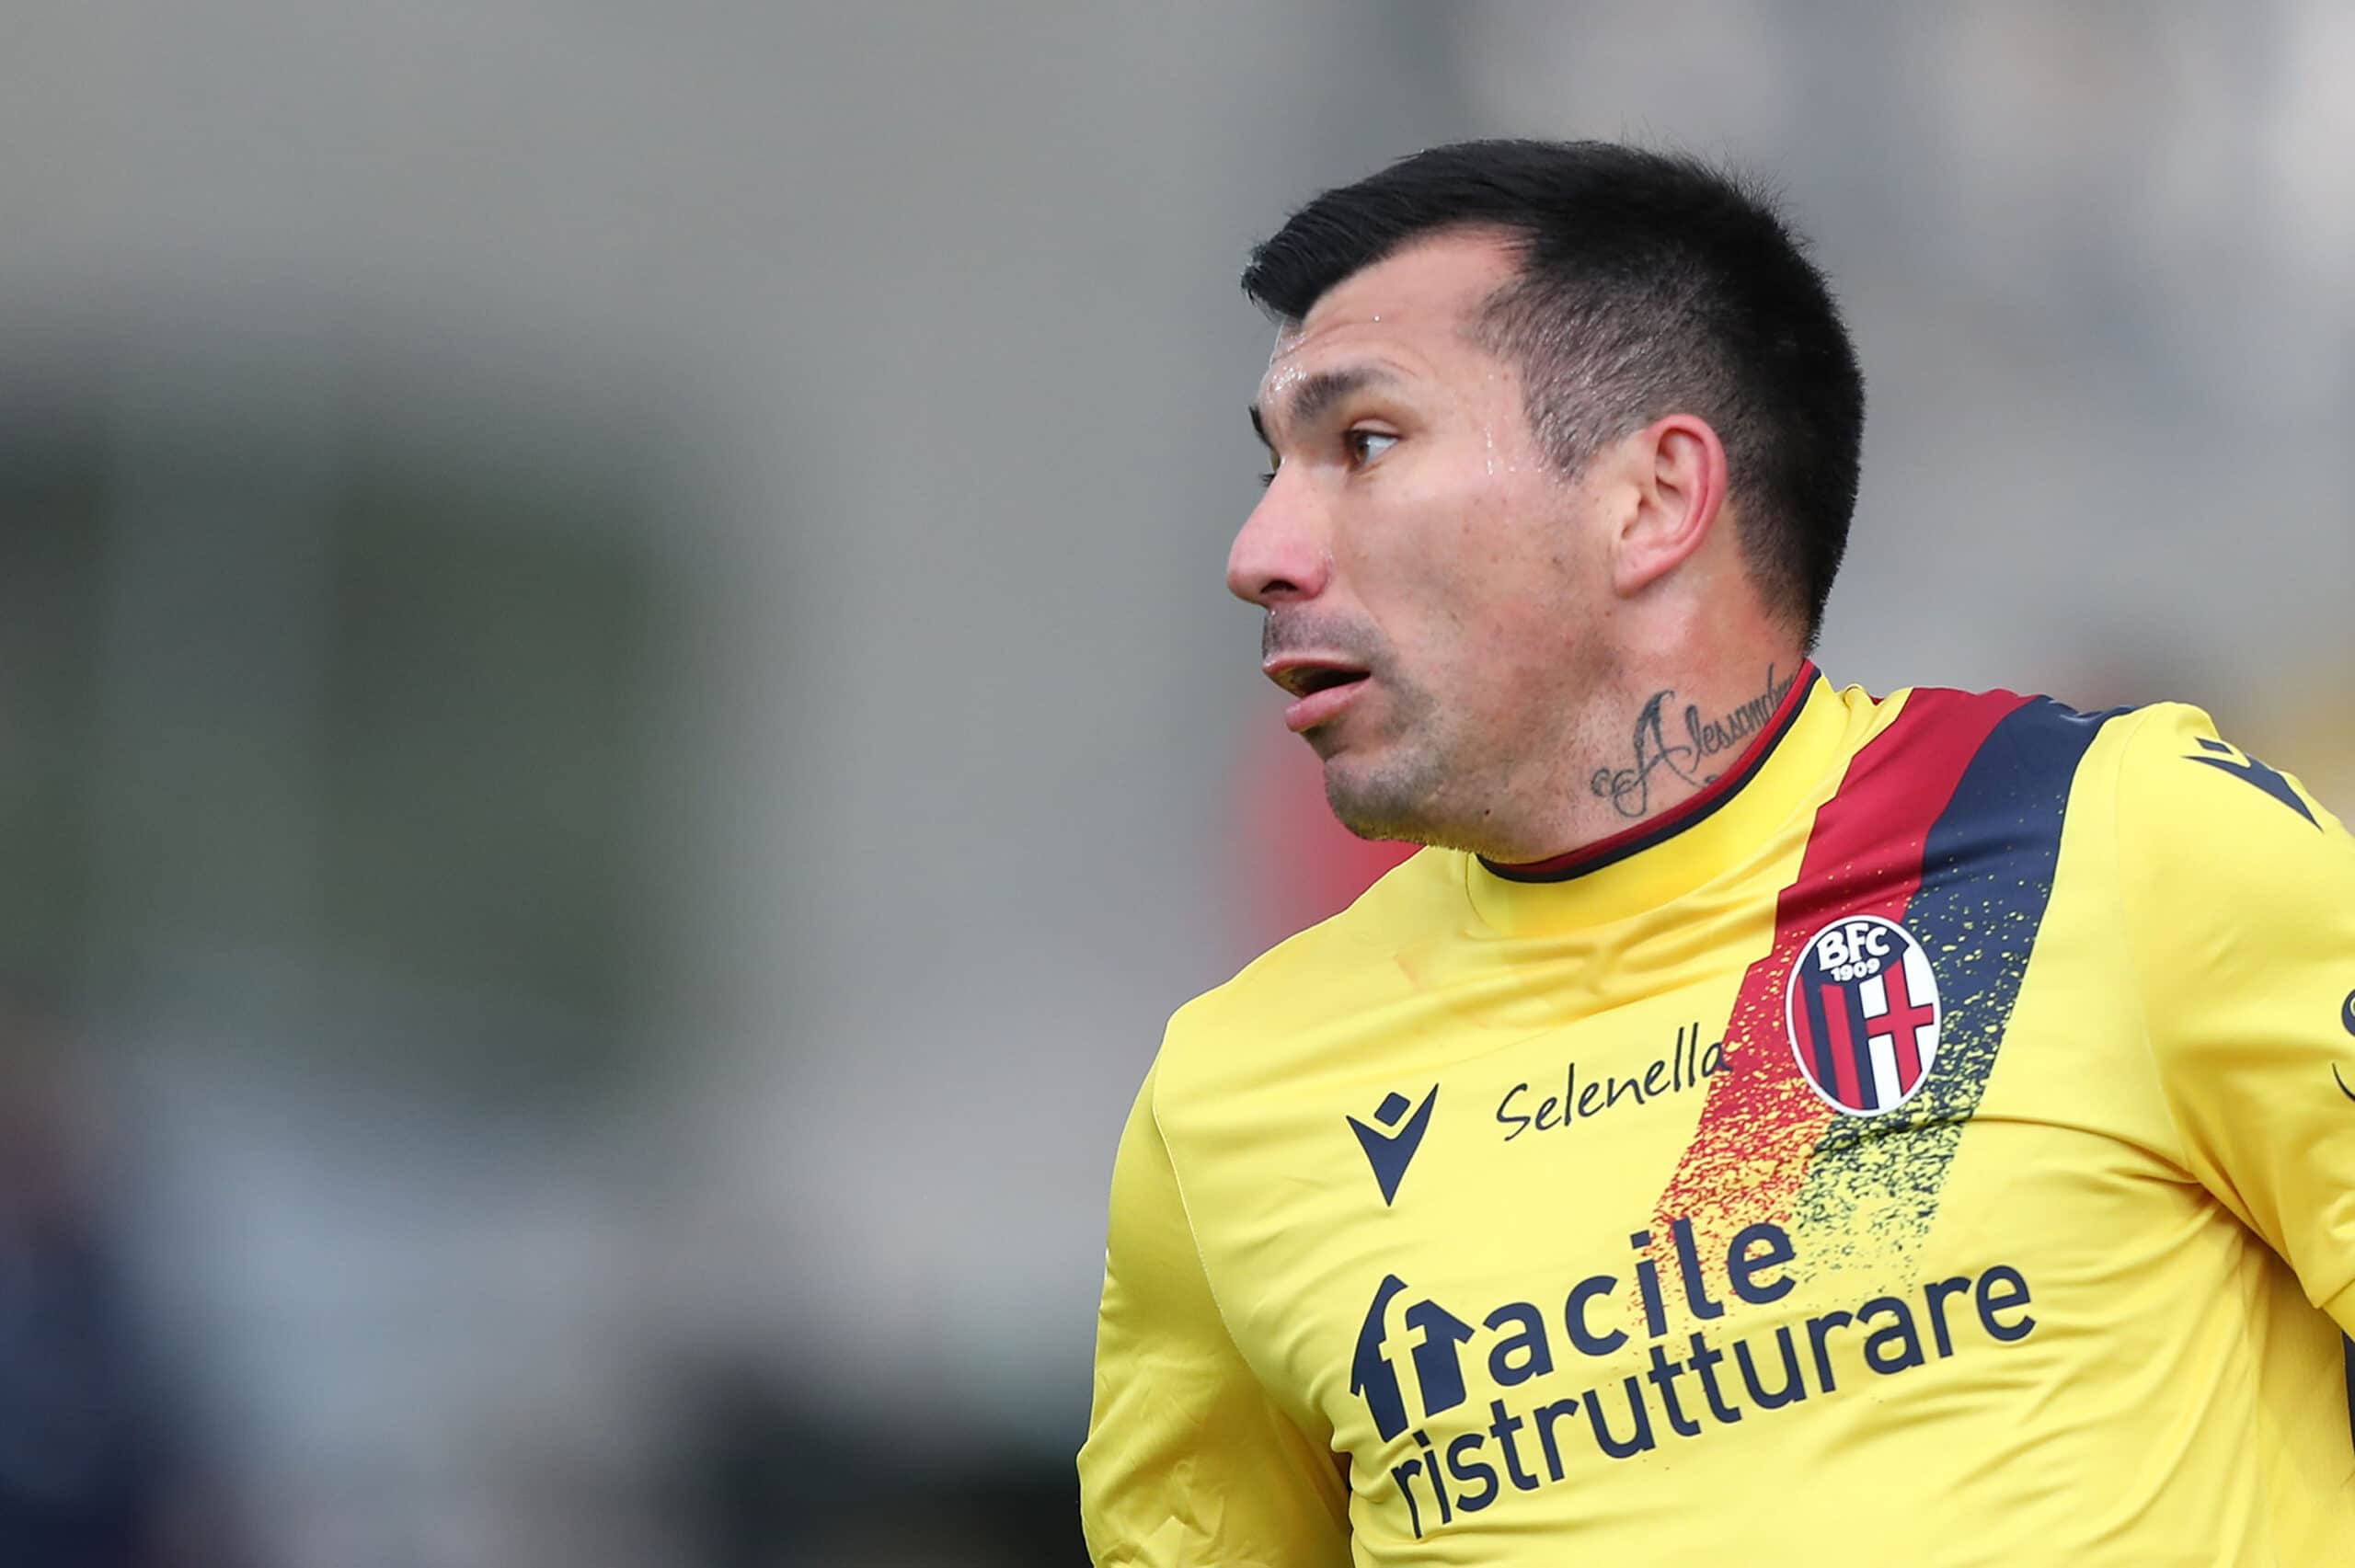 LA SPEZIA, ITALY - NOVEMBER 28: Soto Gary Alexis Medel of Bologna FC looks on during the Serie A match between Spezia Calcio and Bologna FC at Stadio Alberto Picco on November 28, 2021 in La Spezia, Italy. (Photo by Gabriele Maltinti/Getty Images)